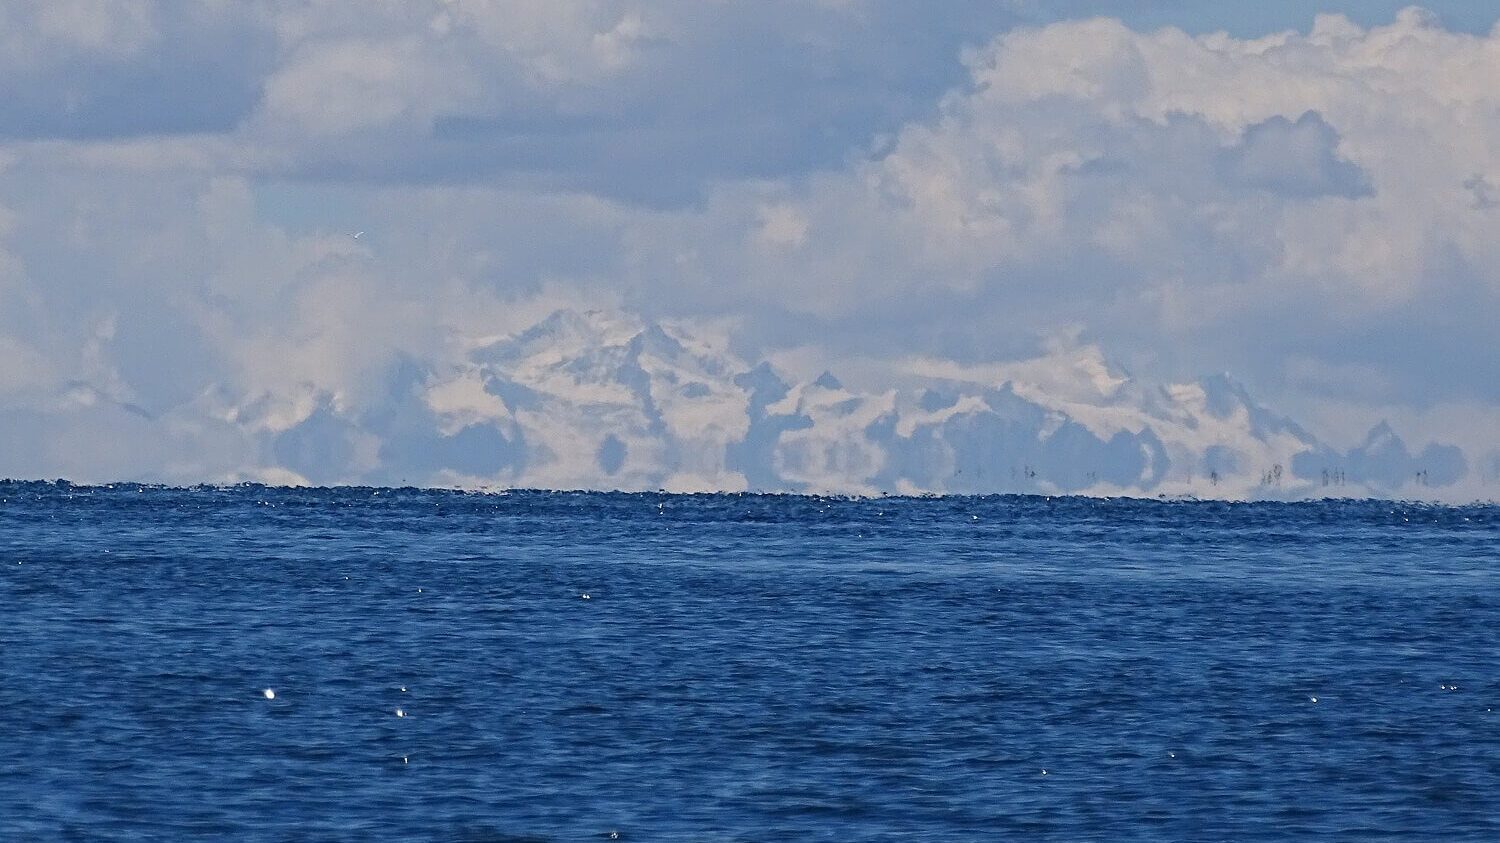 Double horizon on Lake Titicaca as Bolivia's Cordillera Real peaks out above the horizon. Spectacular view as seen during a tour with RESPONSible Travel Peru